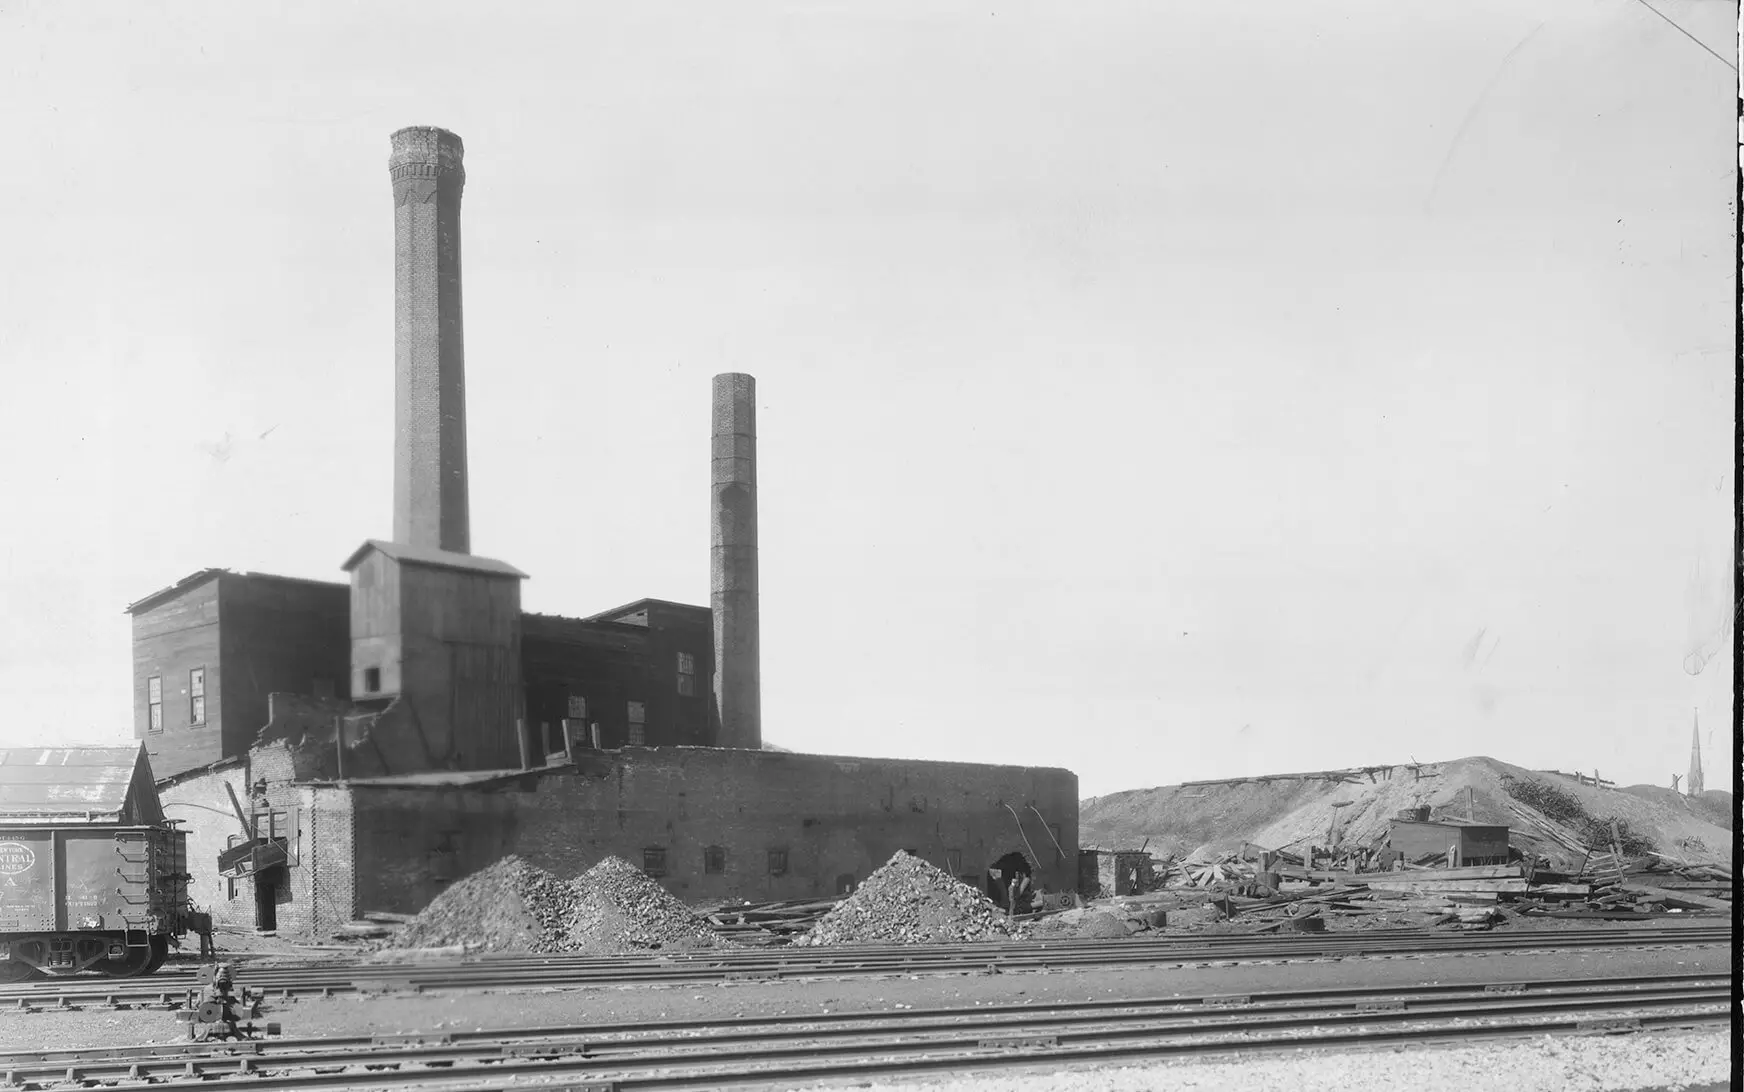 Black and white illustration of a brick building with two large smokestacks. A train car can be seen on the bottom left of the photo with a pile of rubble, likely coal, on the right side.